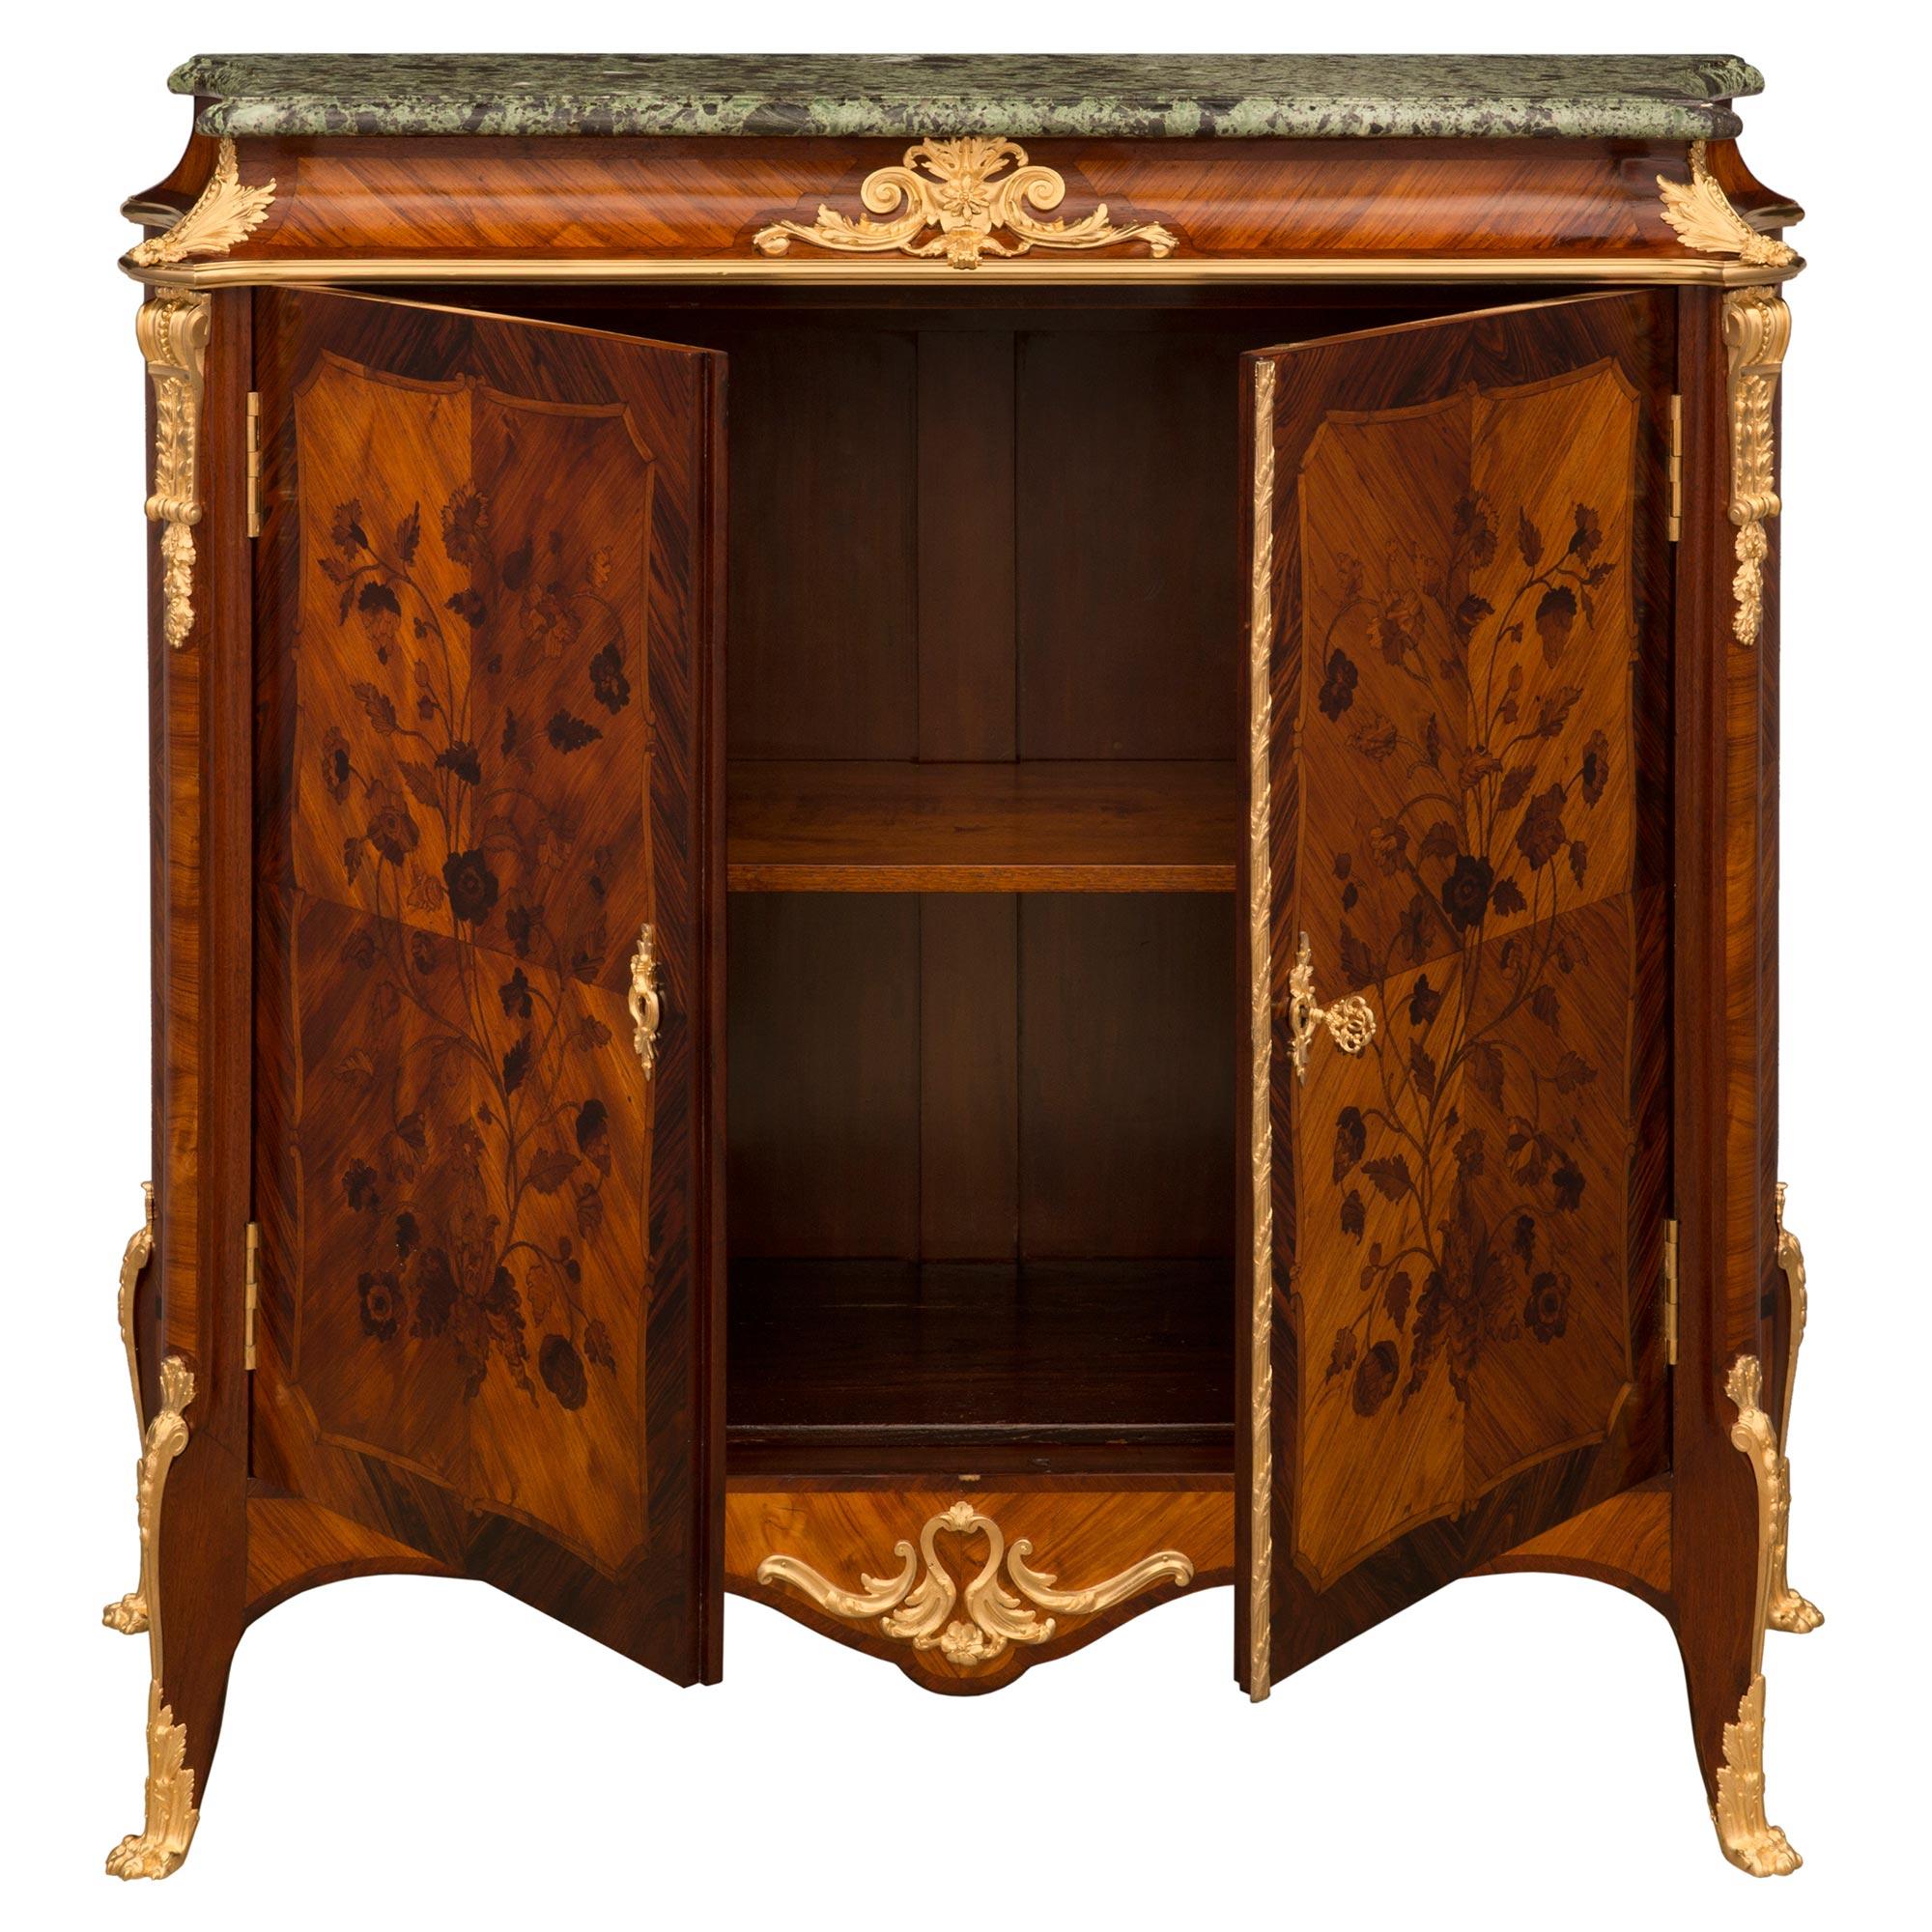 French 19th Century Transitional St. Belle Époque Period Cabinet In Good Condition For Sale In West Palm Beach, FL